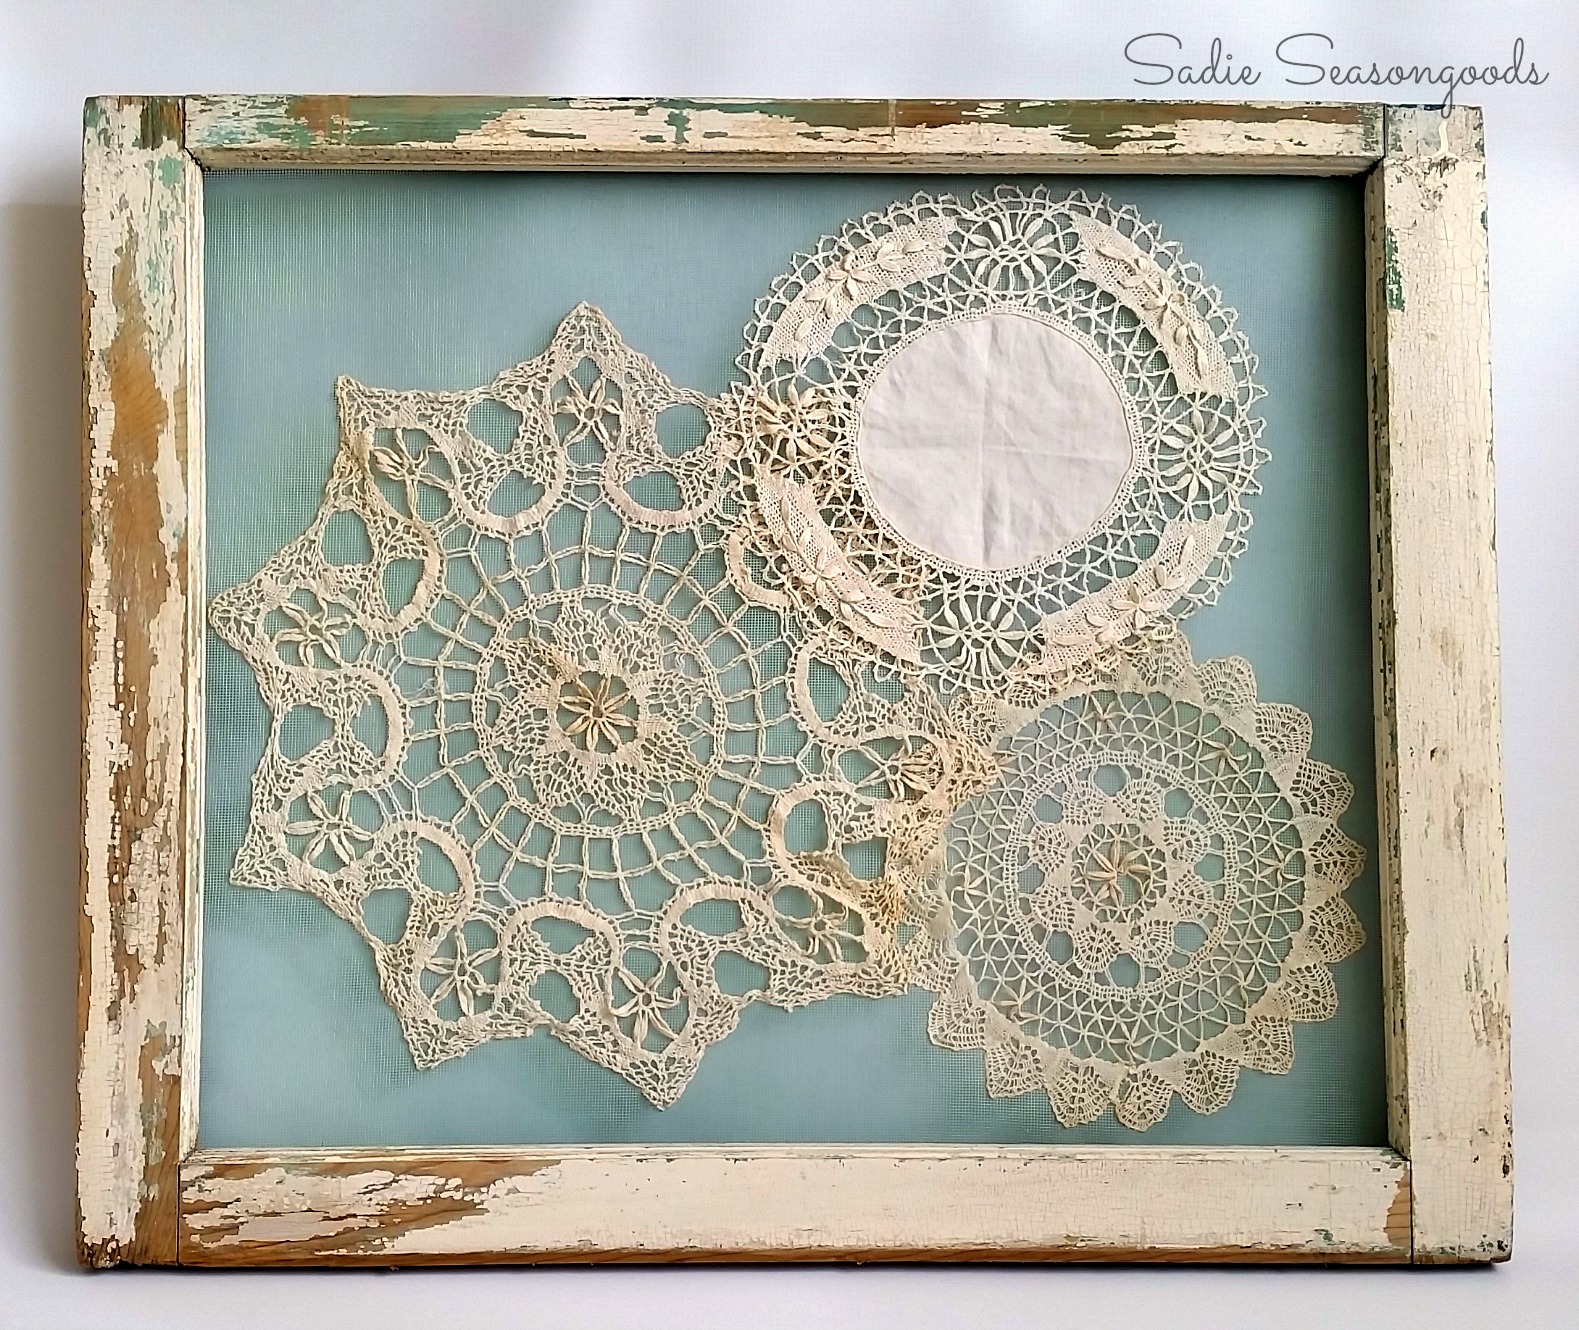 Recycled Window Shabby Chic Doily Display Project